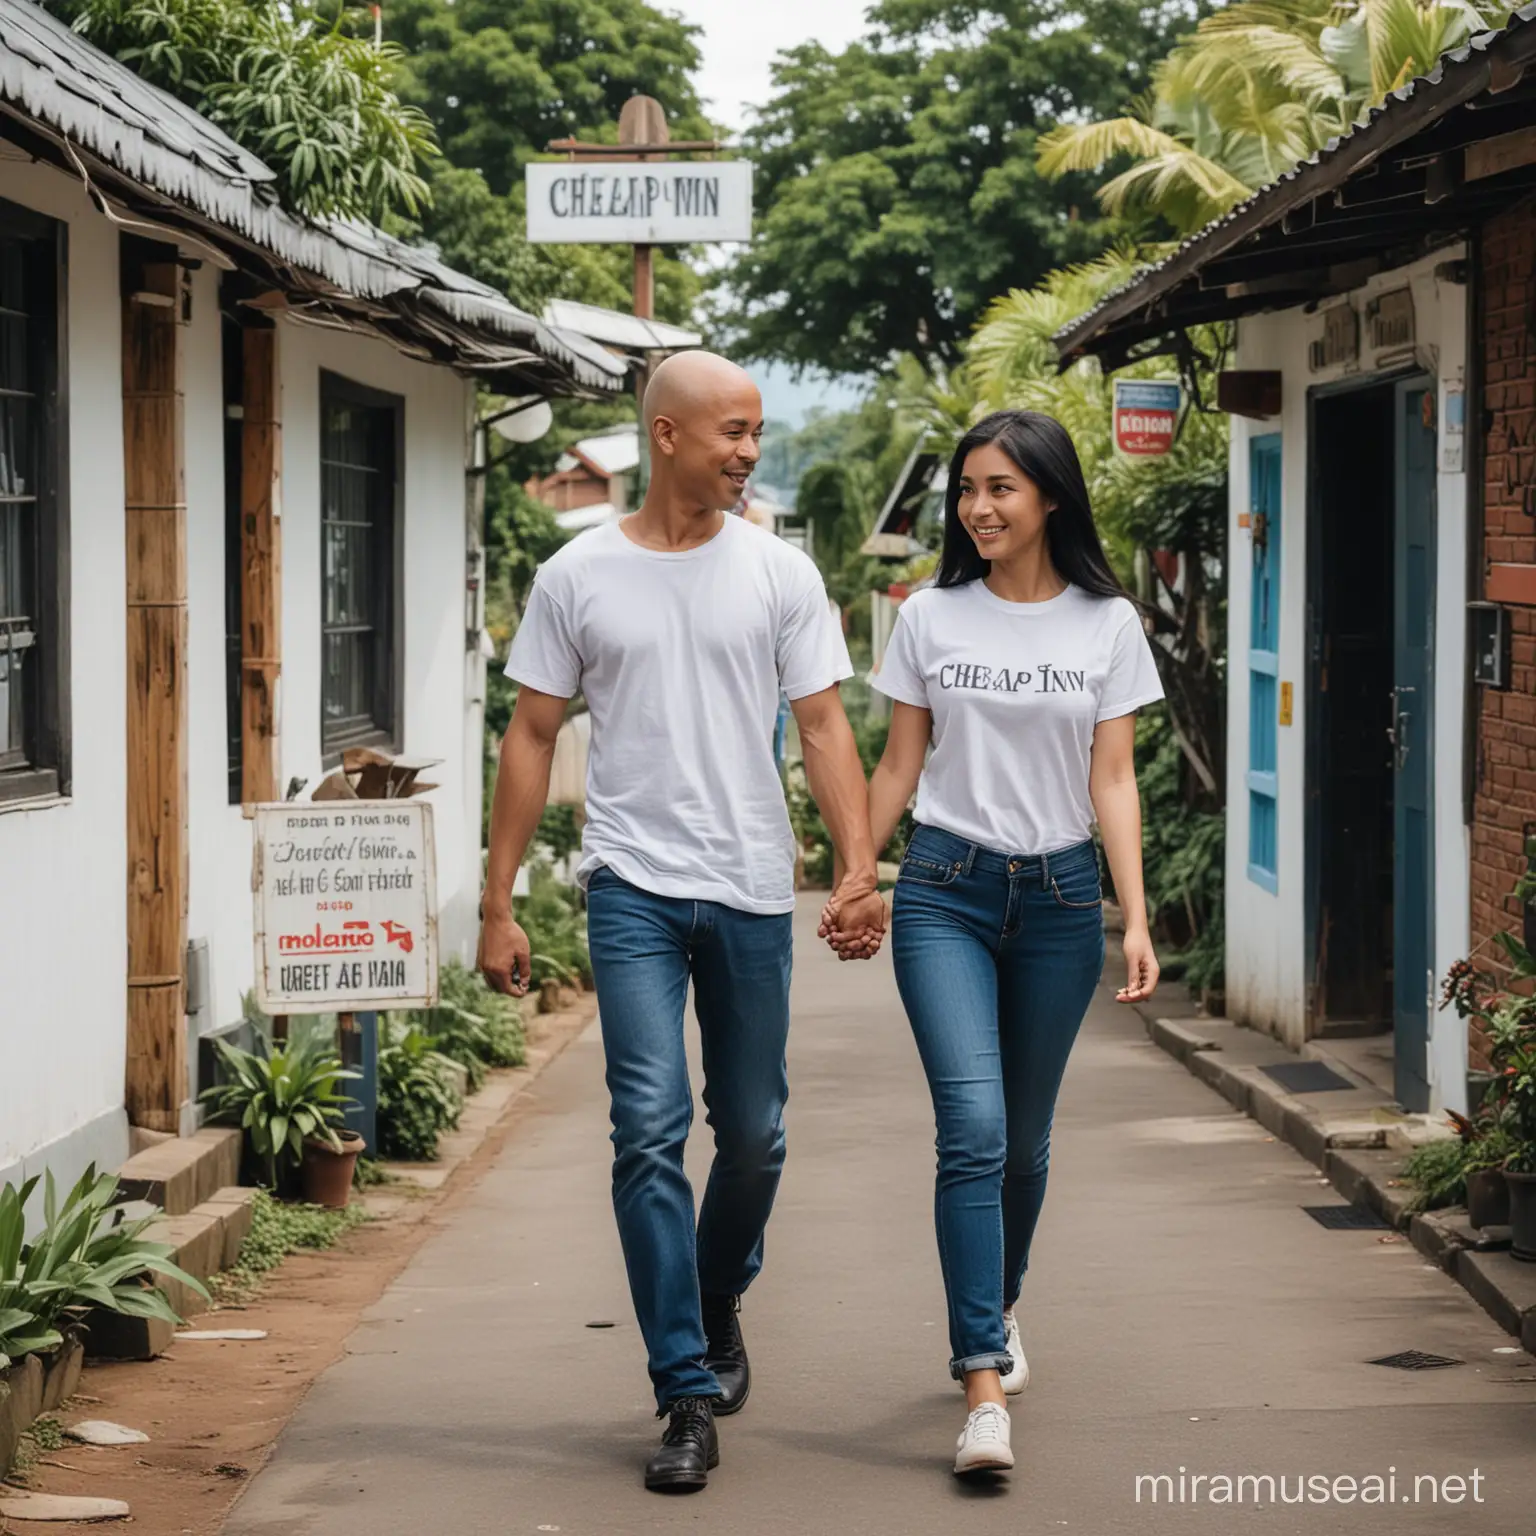 Indonesian Couple Walking to Budget Inn Hand in Hand